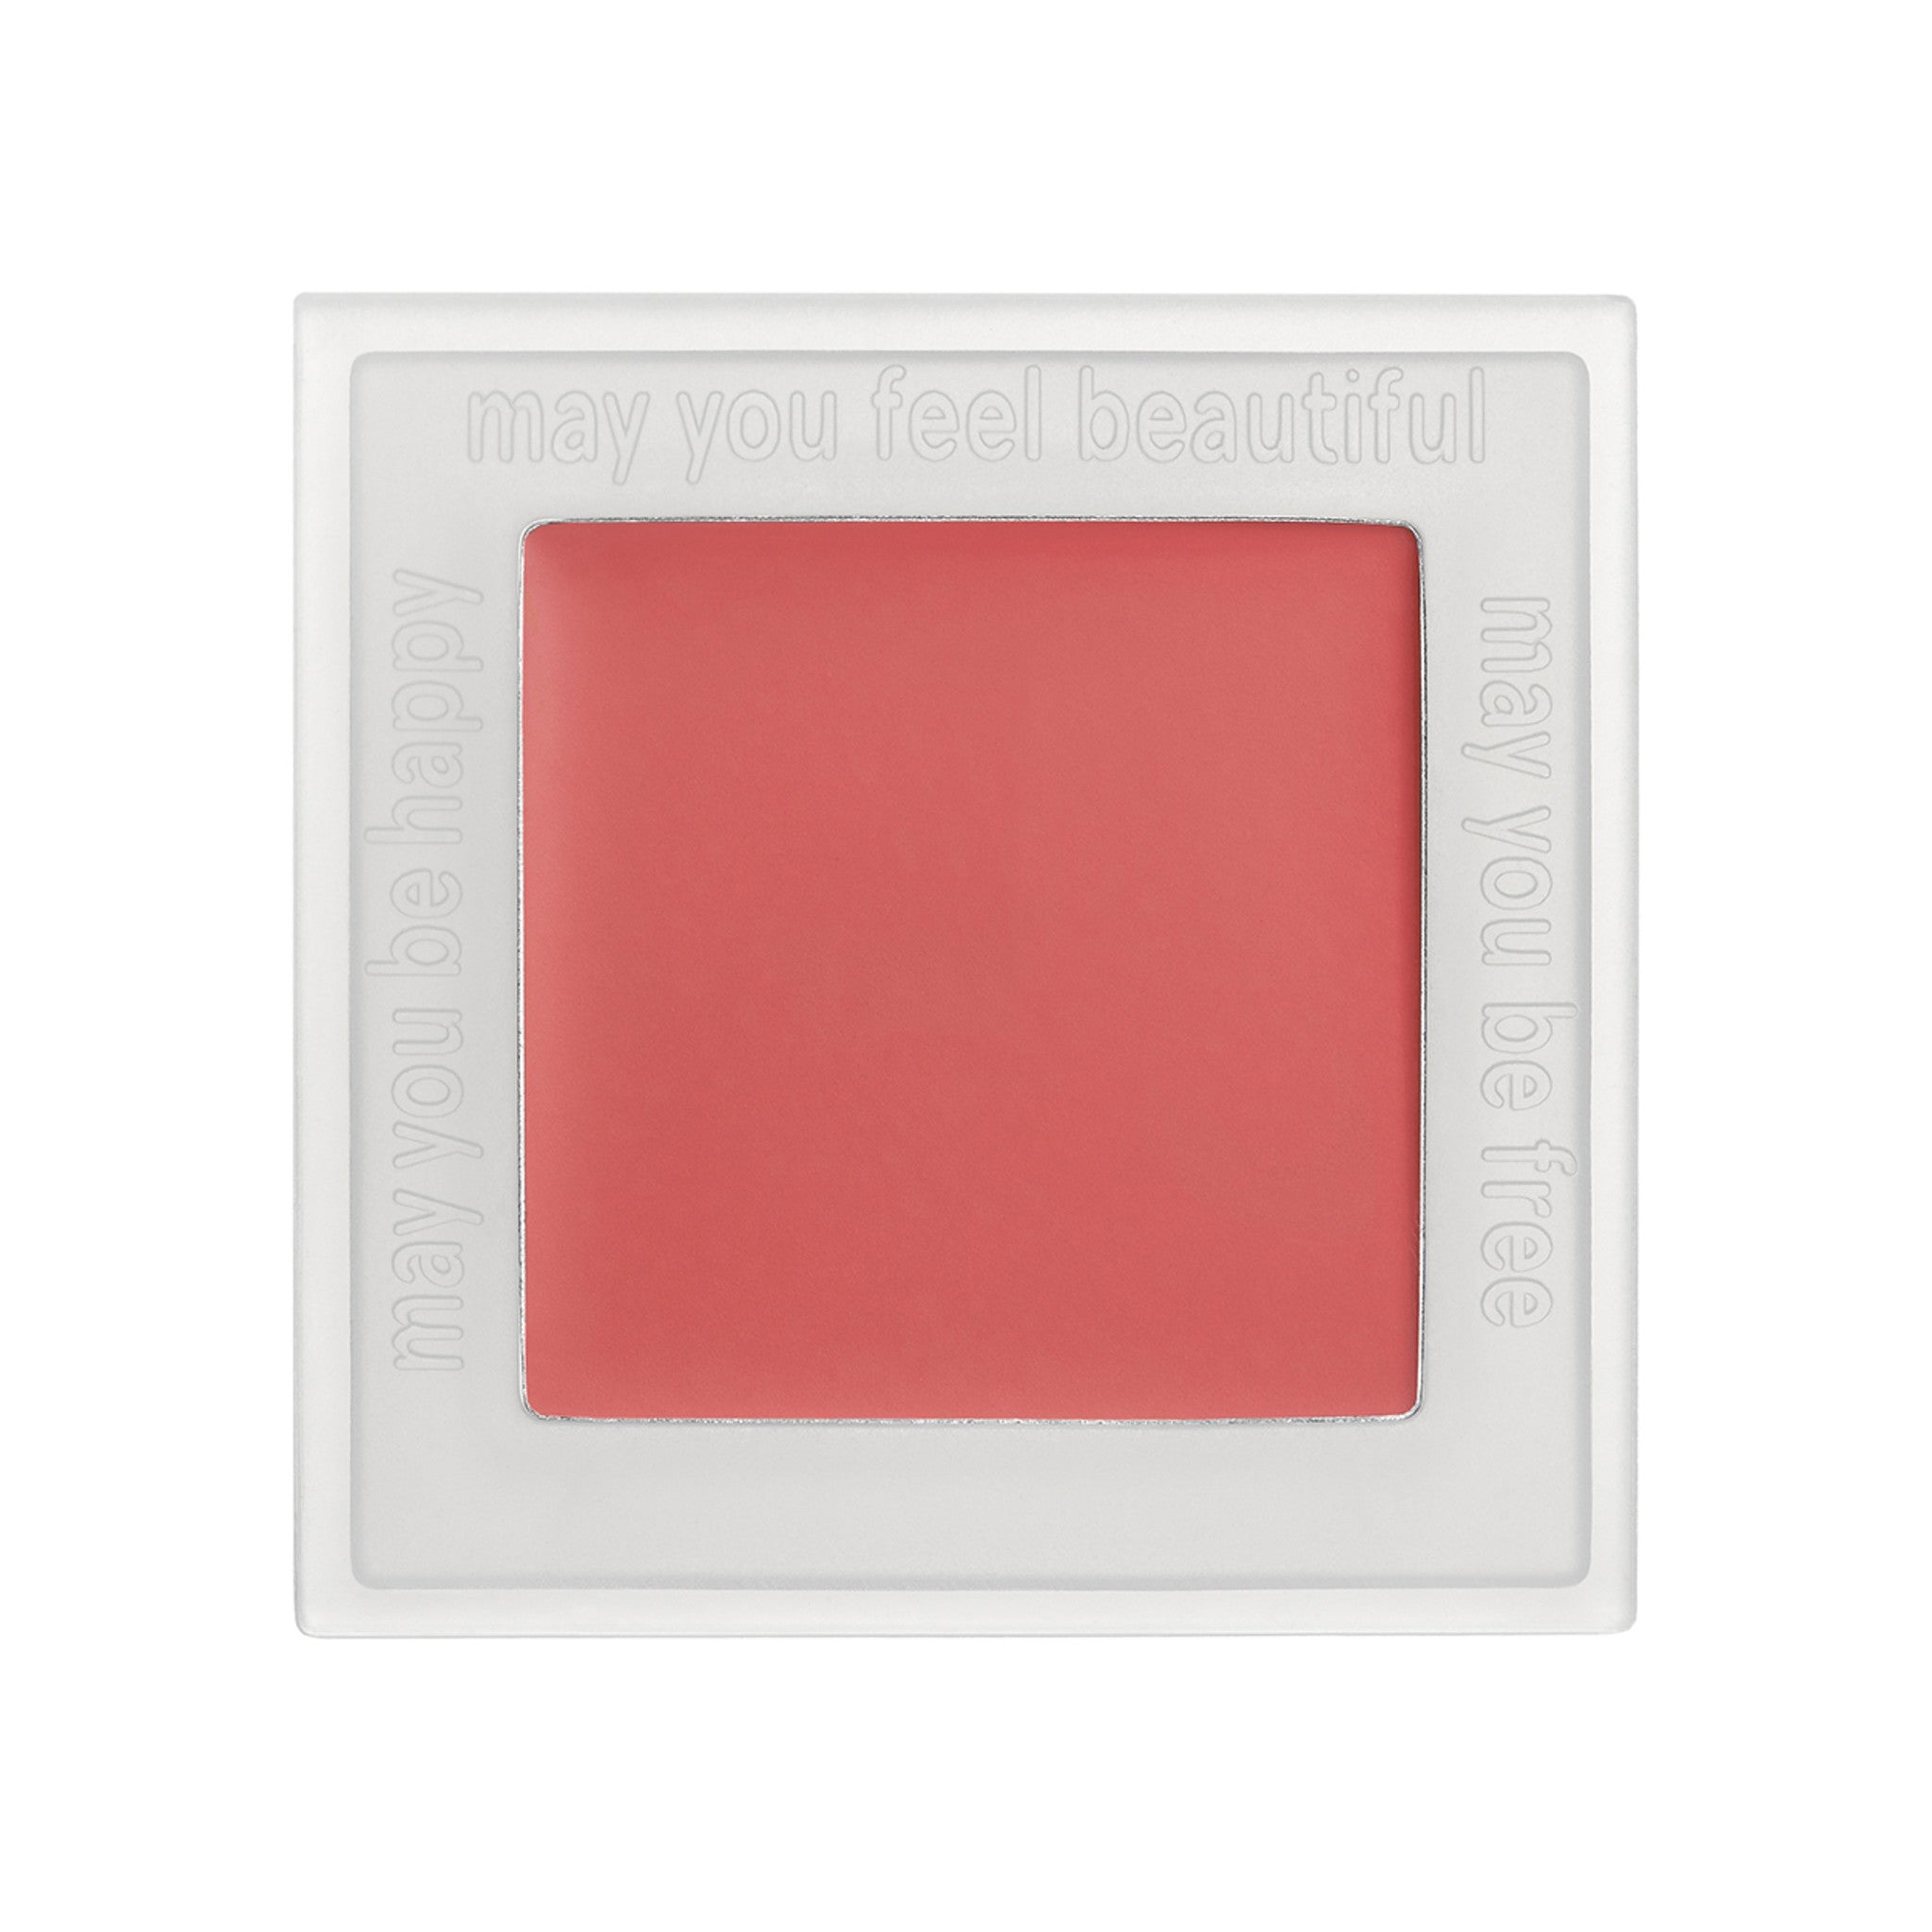 Neen Going Rouge Cream Cheek and Lip Color/Shade variant: Pretty main image. This product is in the color pink